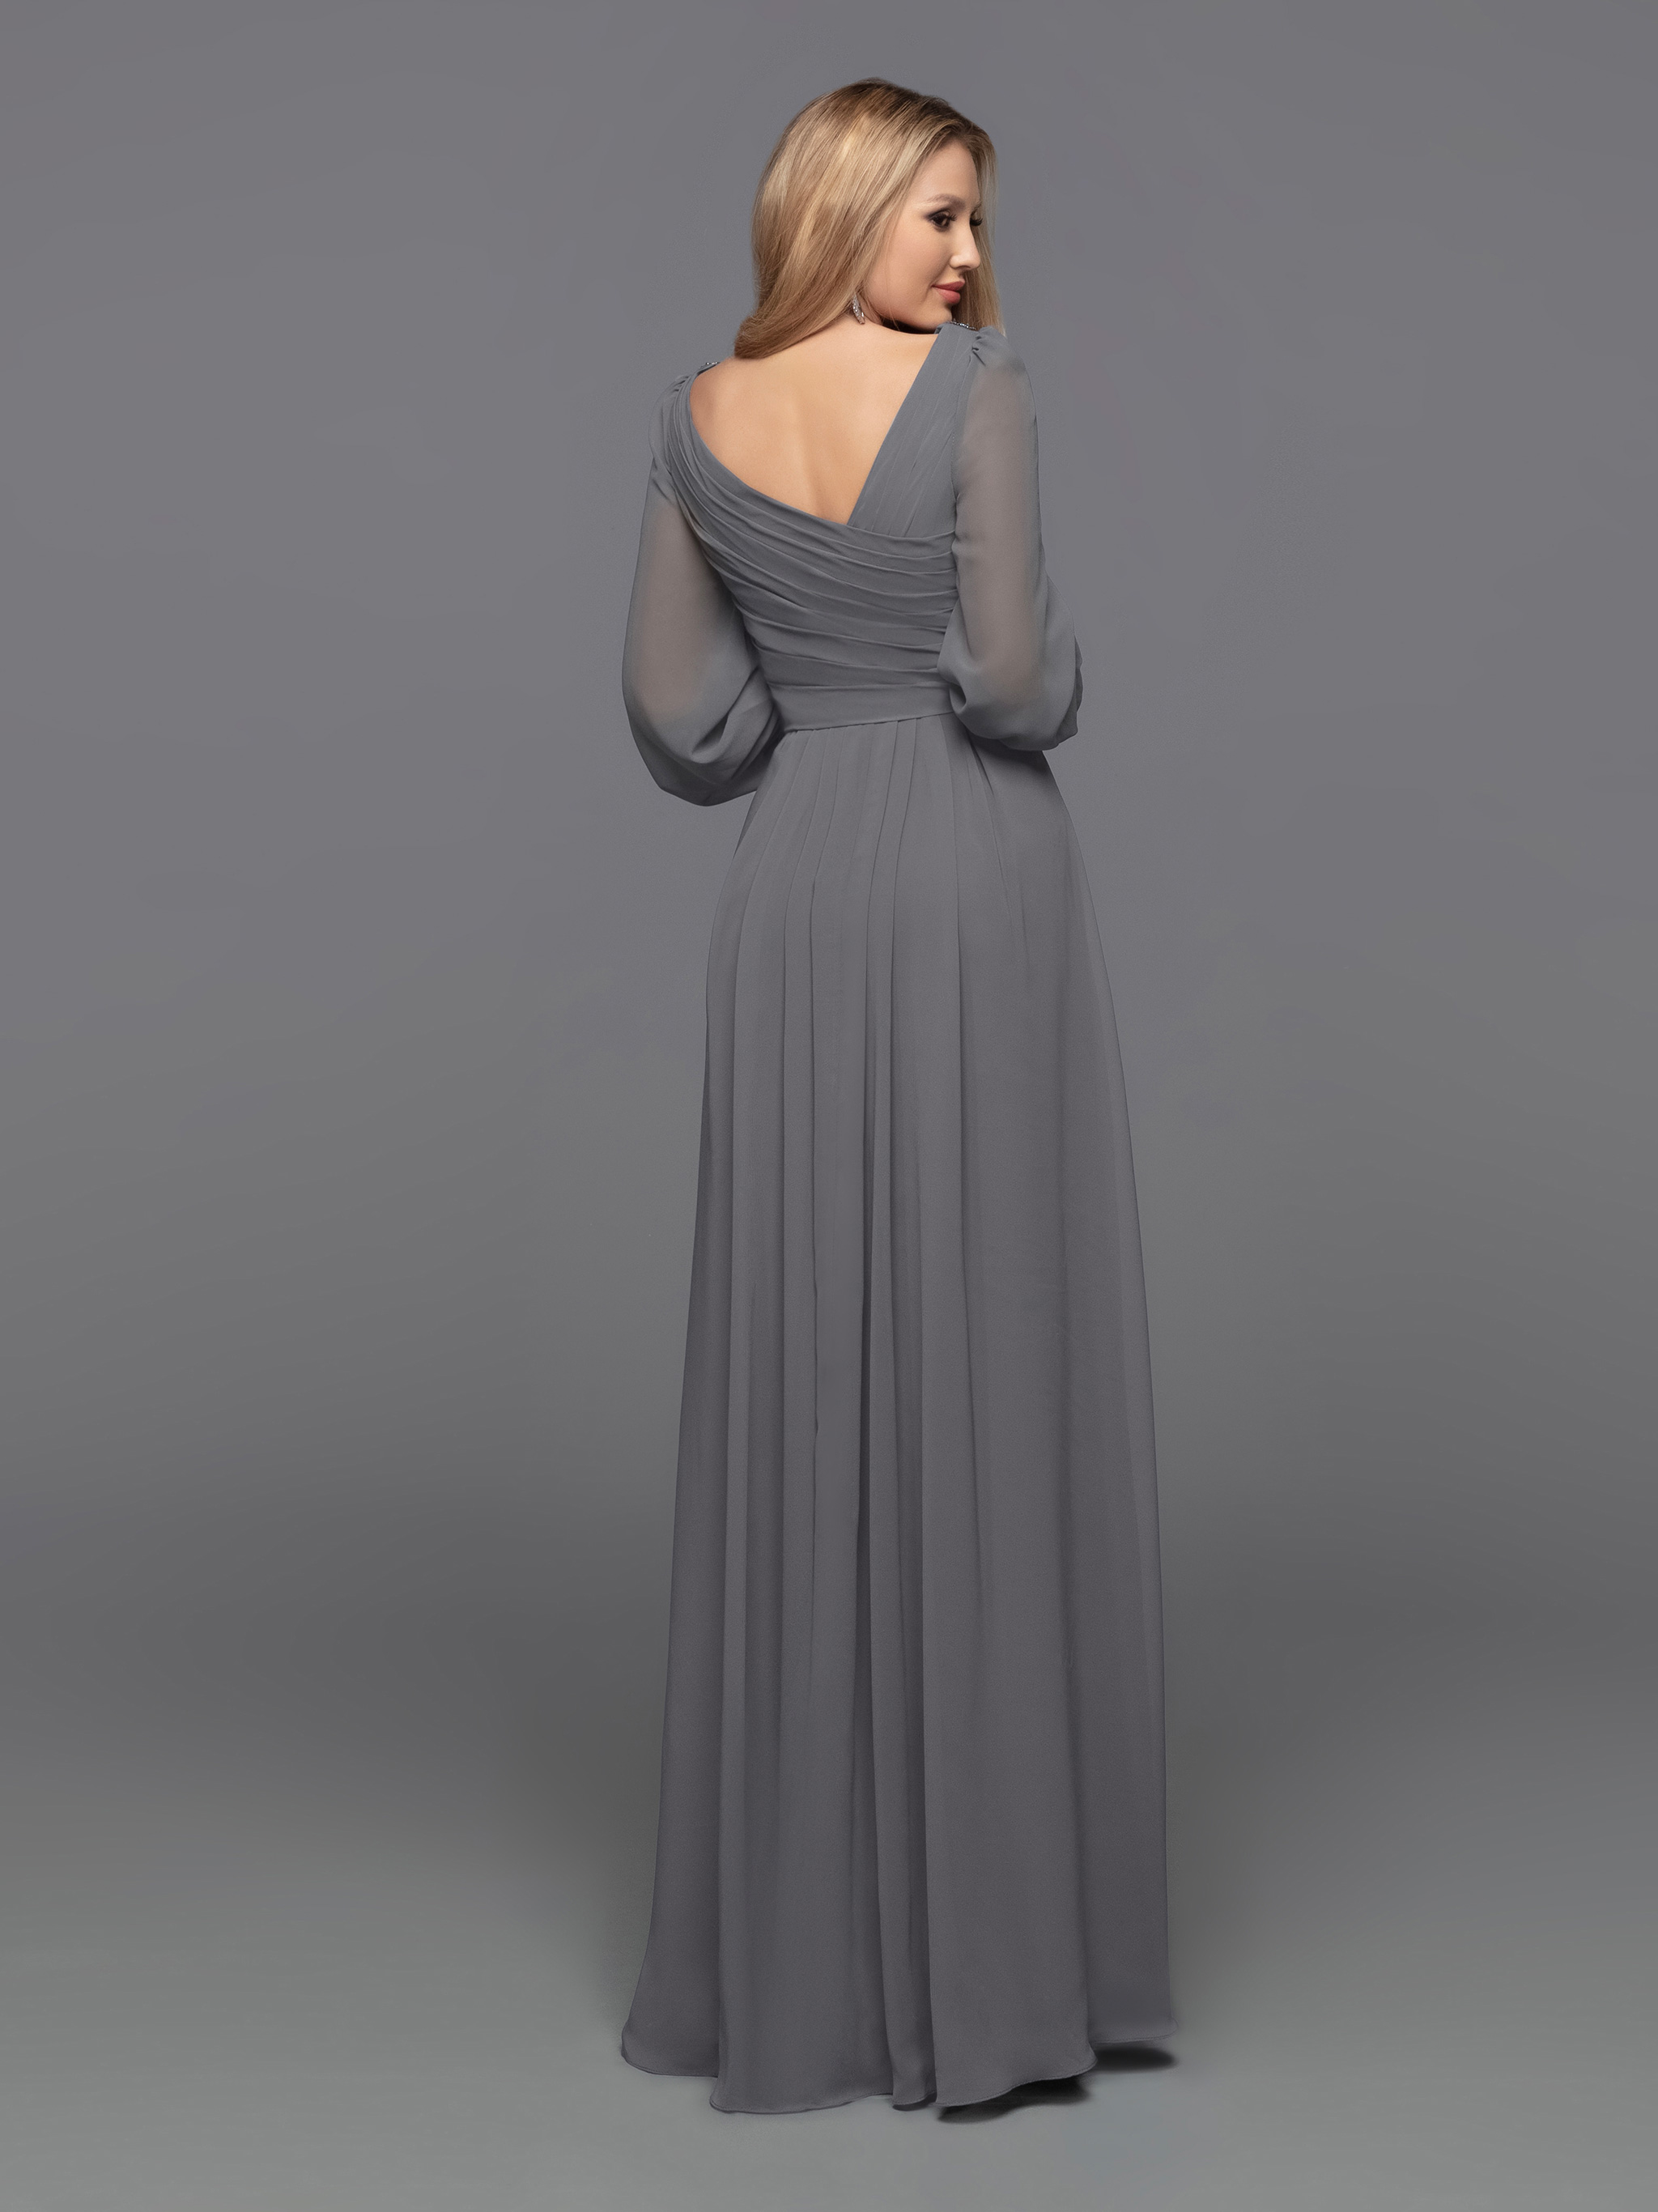 Image showing back view of style #60615